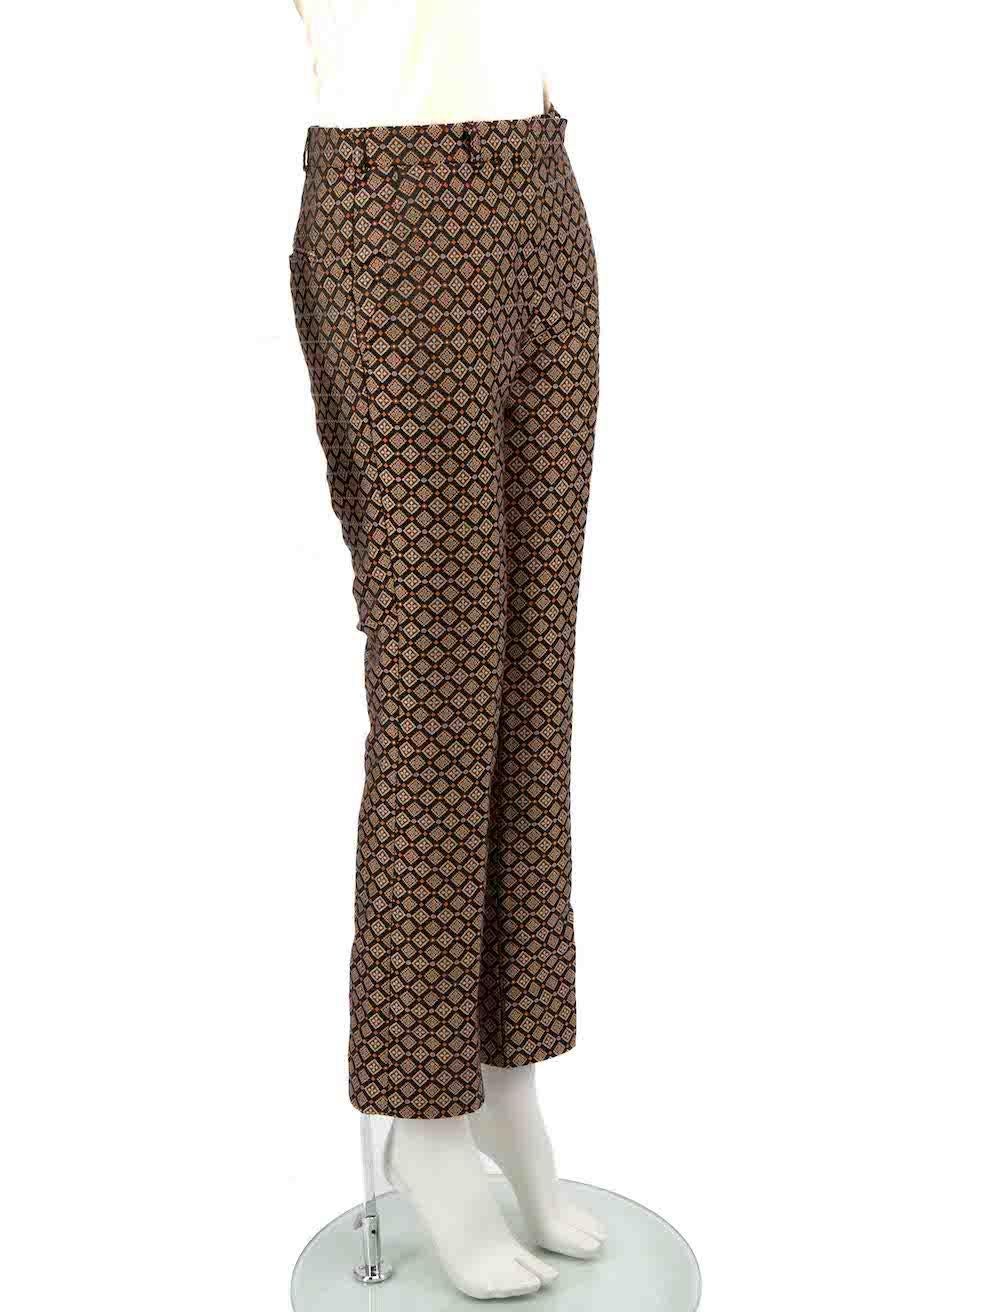 CONDITION is Never worn, with tags. No visible wear to trousers is evident on this new Etro designer resale item.
 
 
 
 Details
 
 
 Brown
 
 Polyester
 
 Trousers
 
 Abstract pattern
 
 Straight leg
 
 Mid rise
 
 2x Side pockets
 
 1x Back